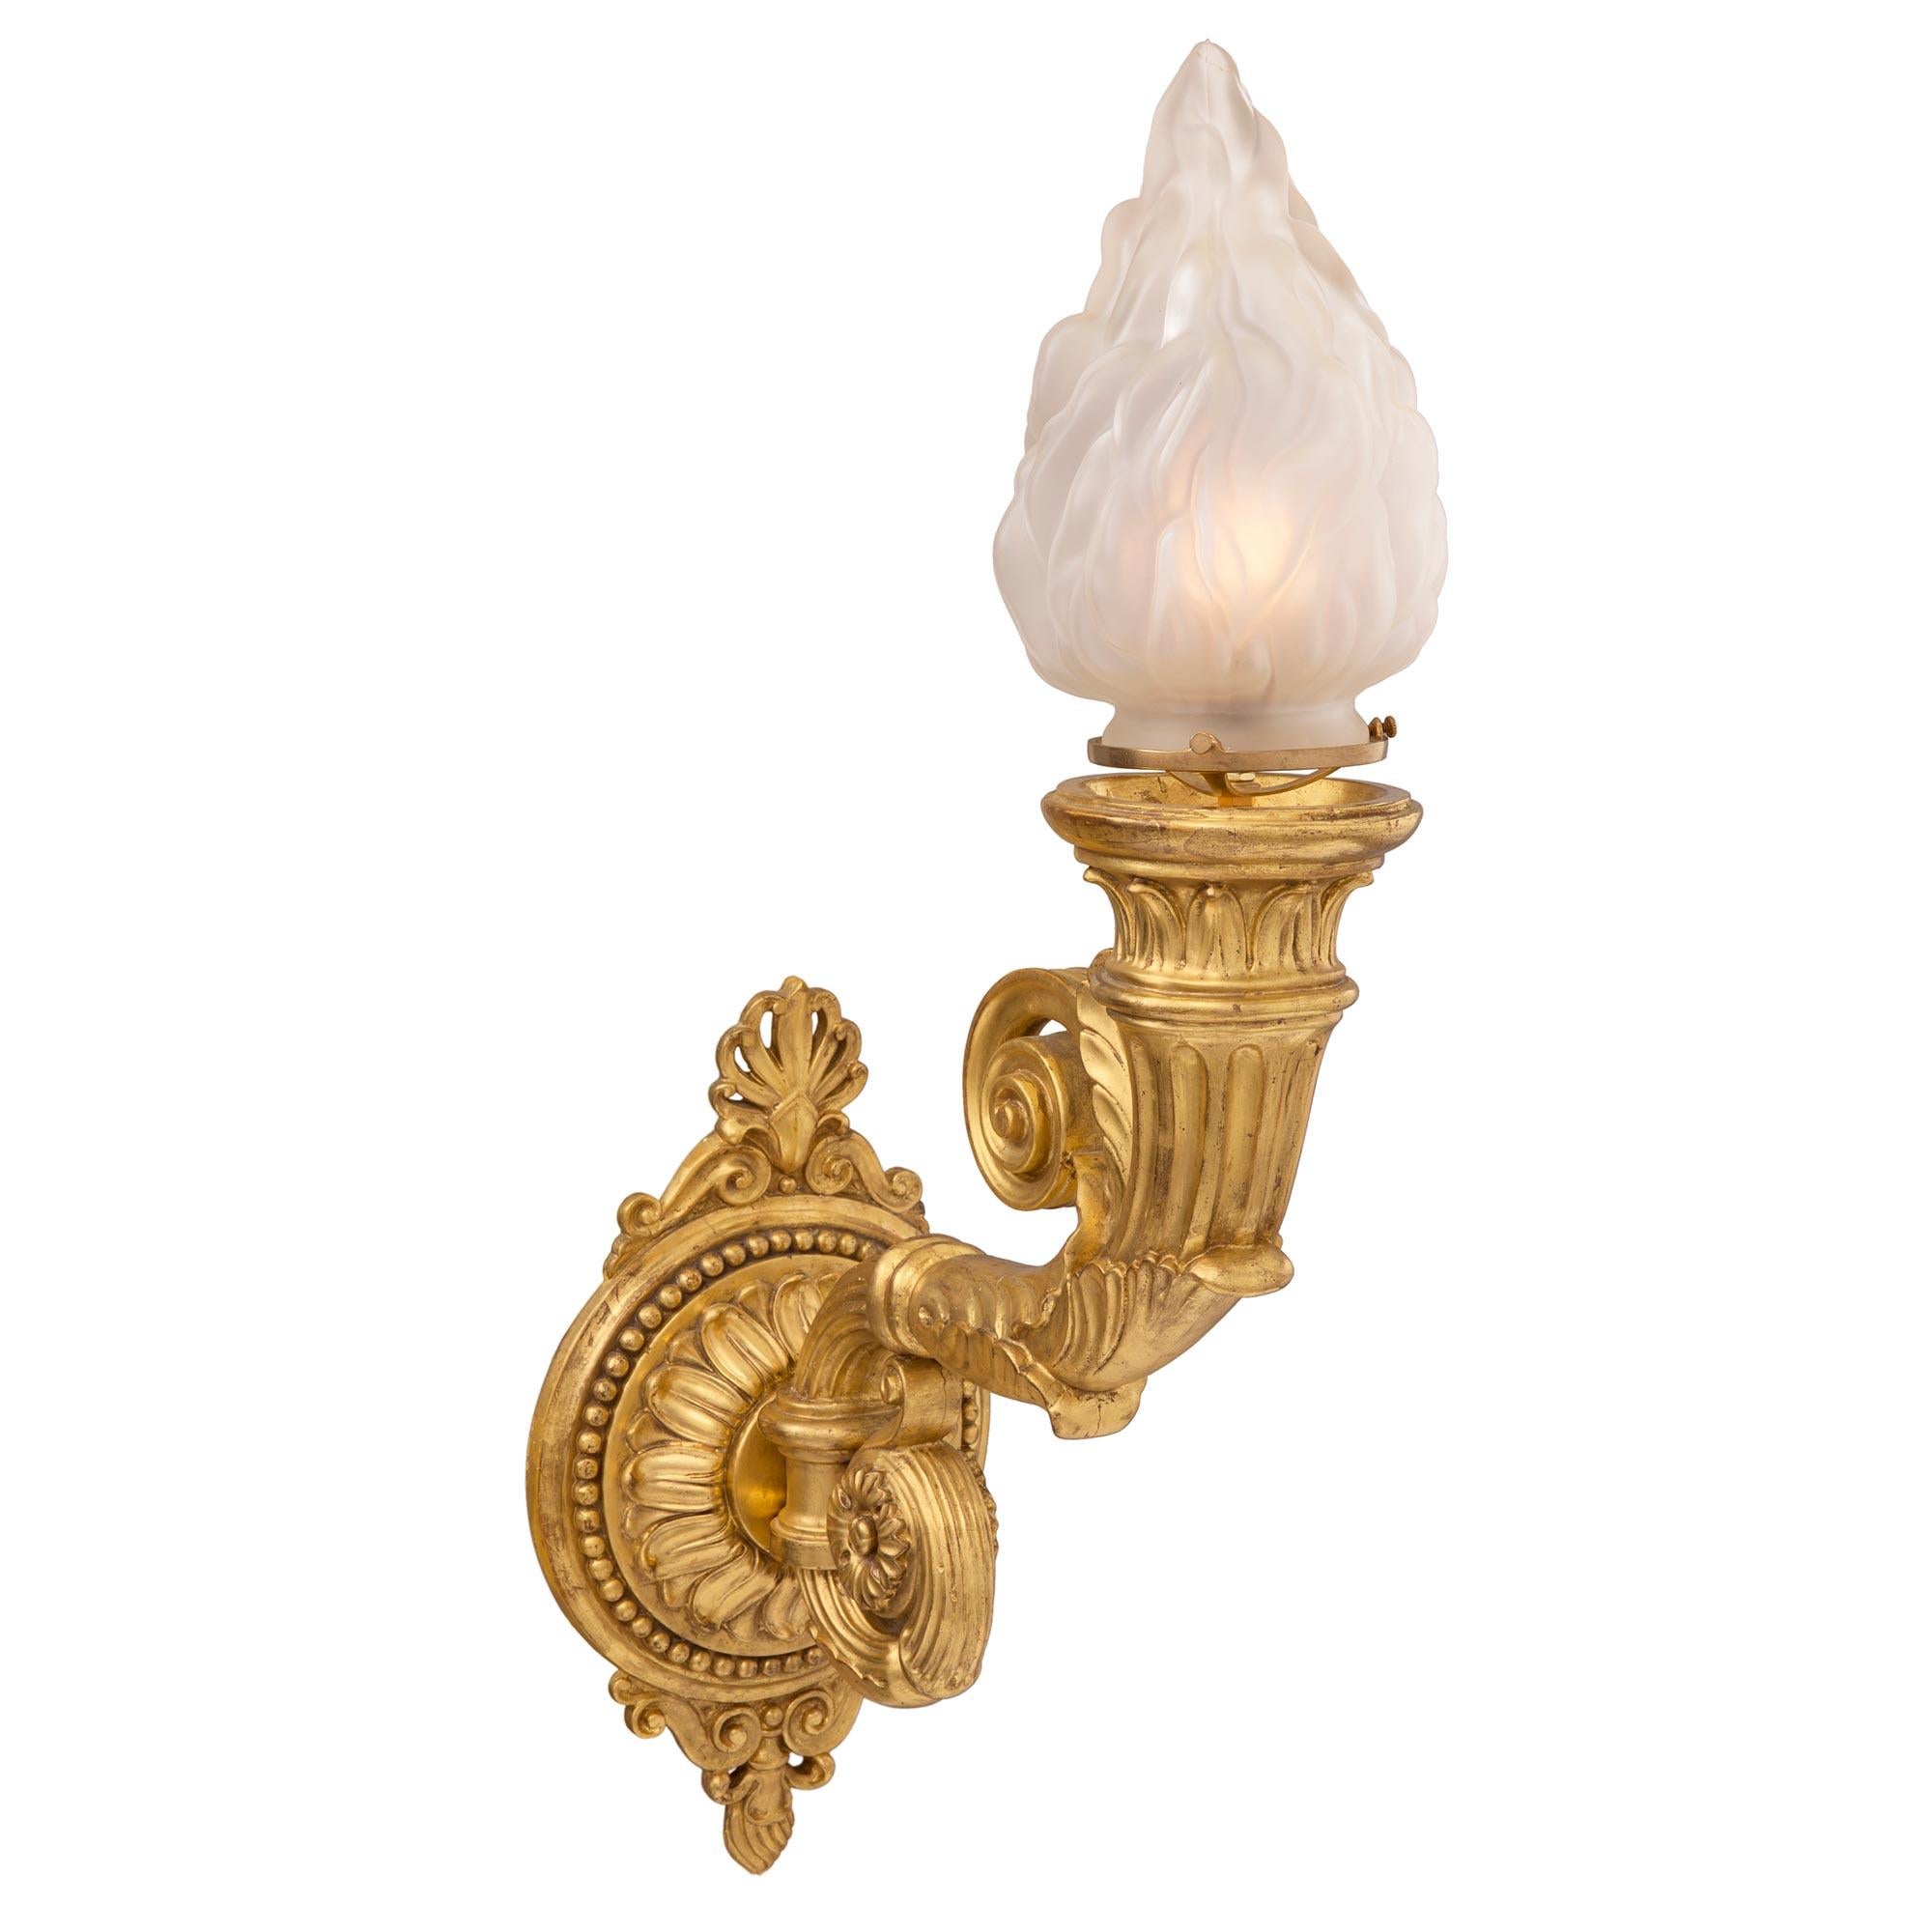 An exquisite and large scale pair of Italian 19th century neo-classical st. giltwood and frosted glass Bras de Lumière sconces. Each sconce displays a most decorative circular back plate with an elegant beaded band, richly carved foliate designs and